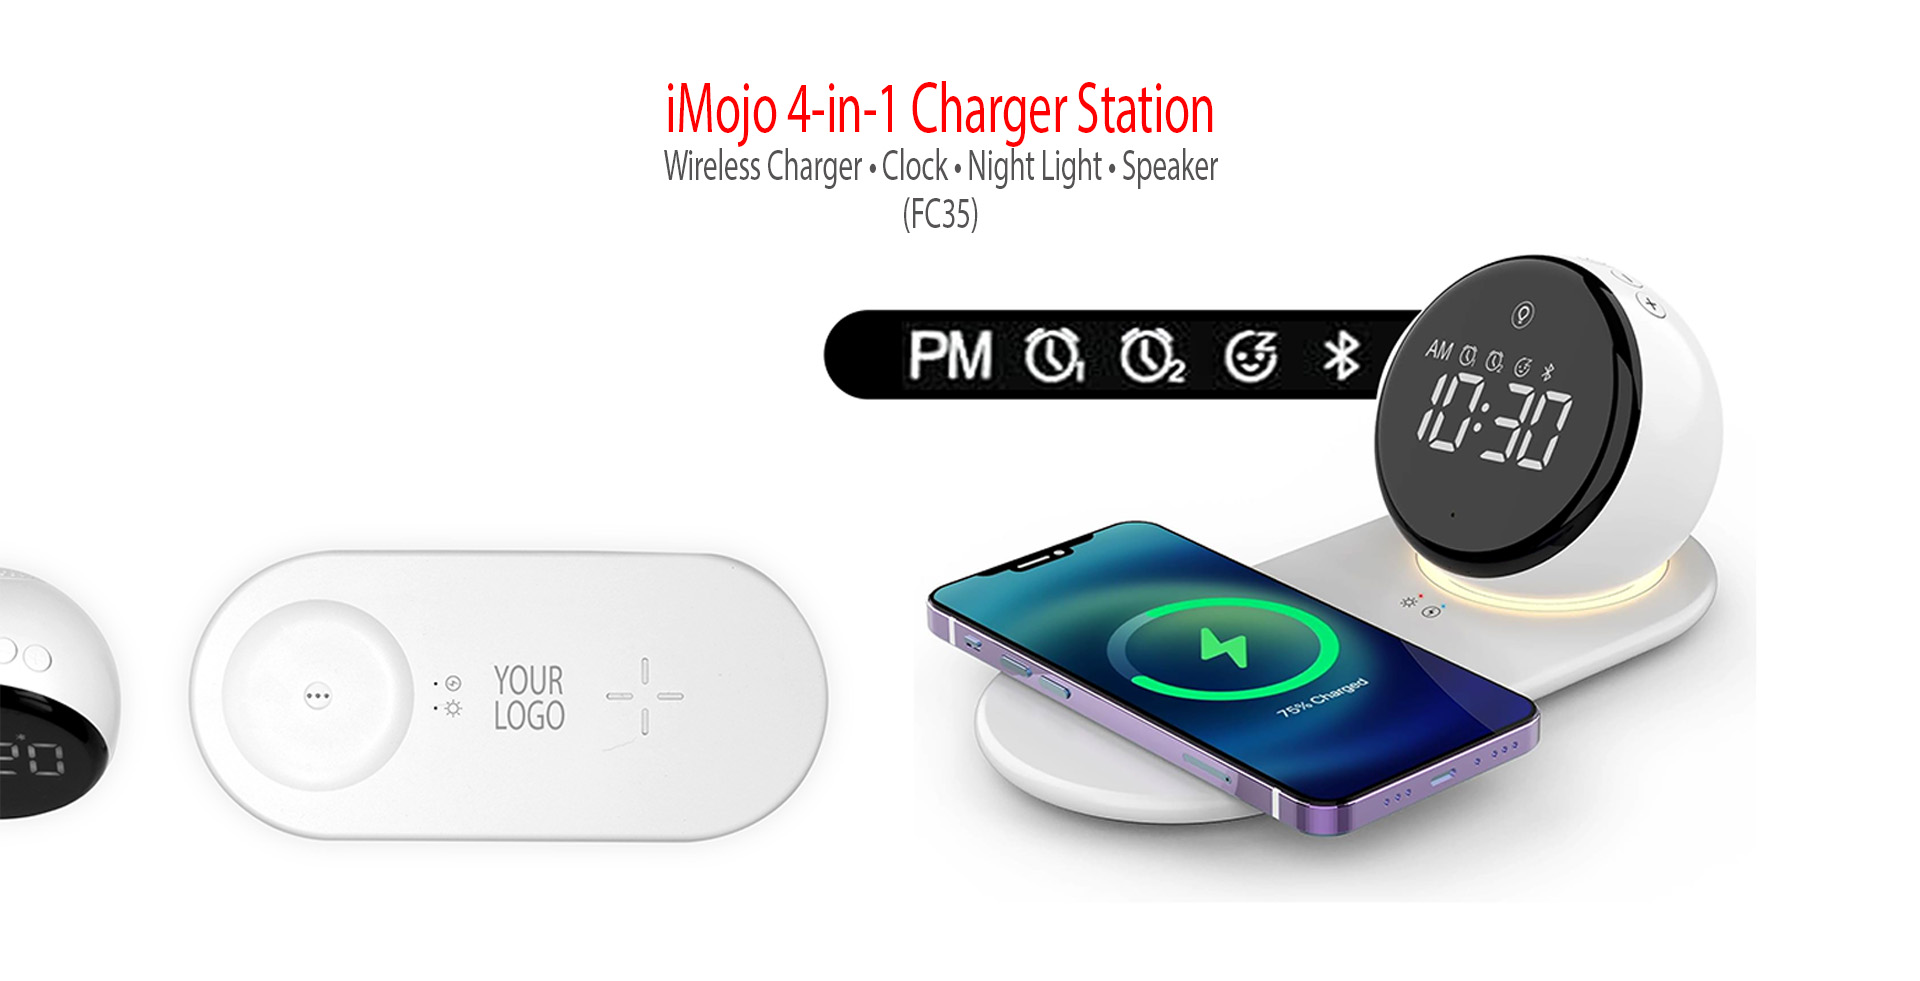 4-in-1 Wireless Charger